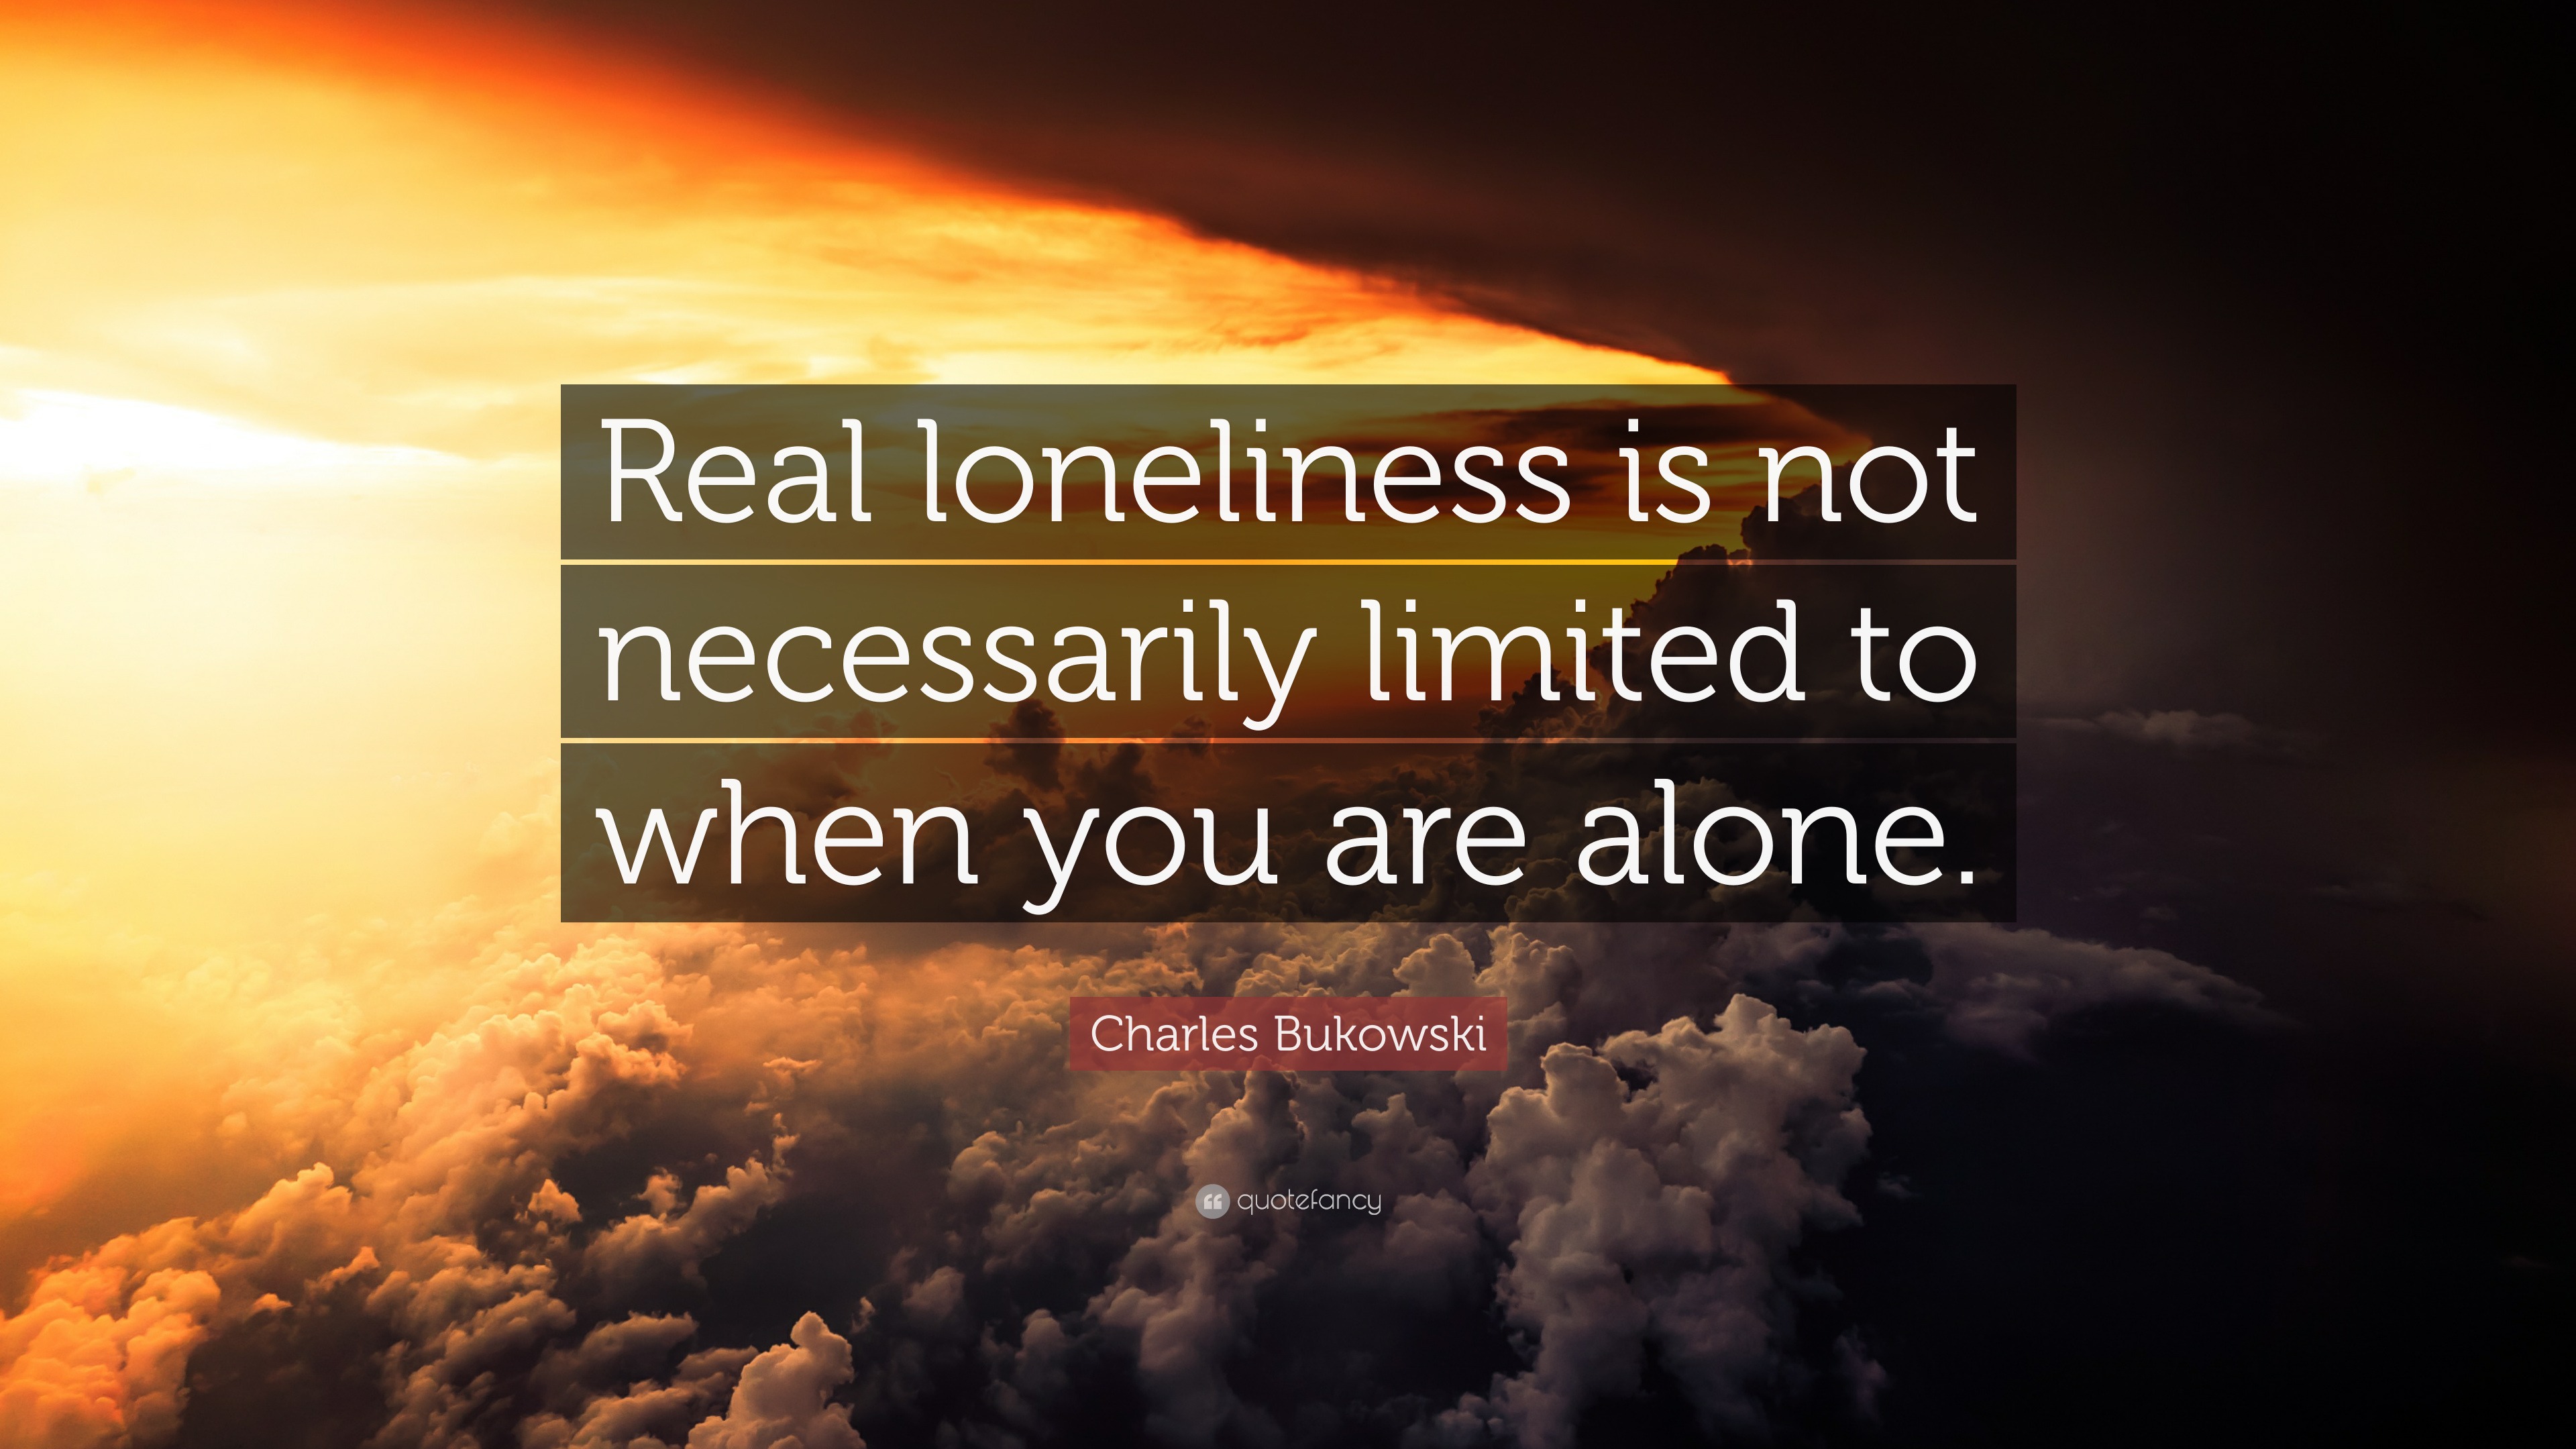 Charles Bukowski Quote: “Real loneliness is not necessarily limited to ...